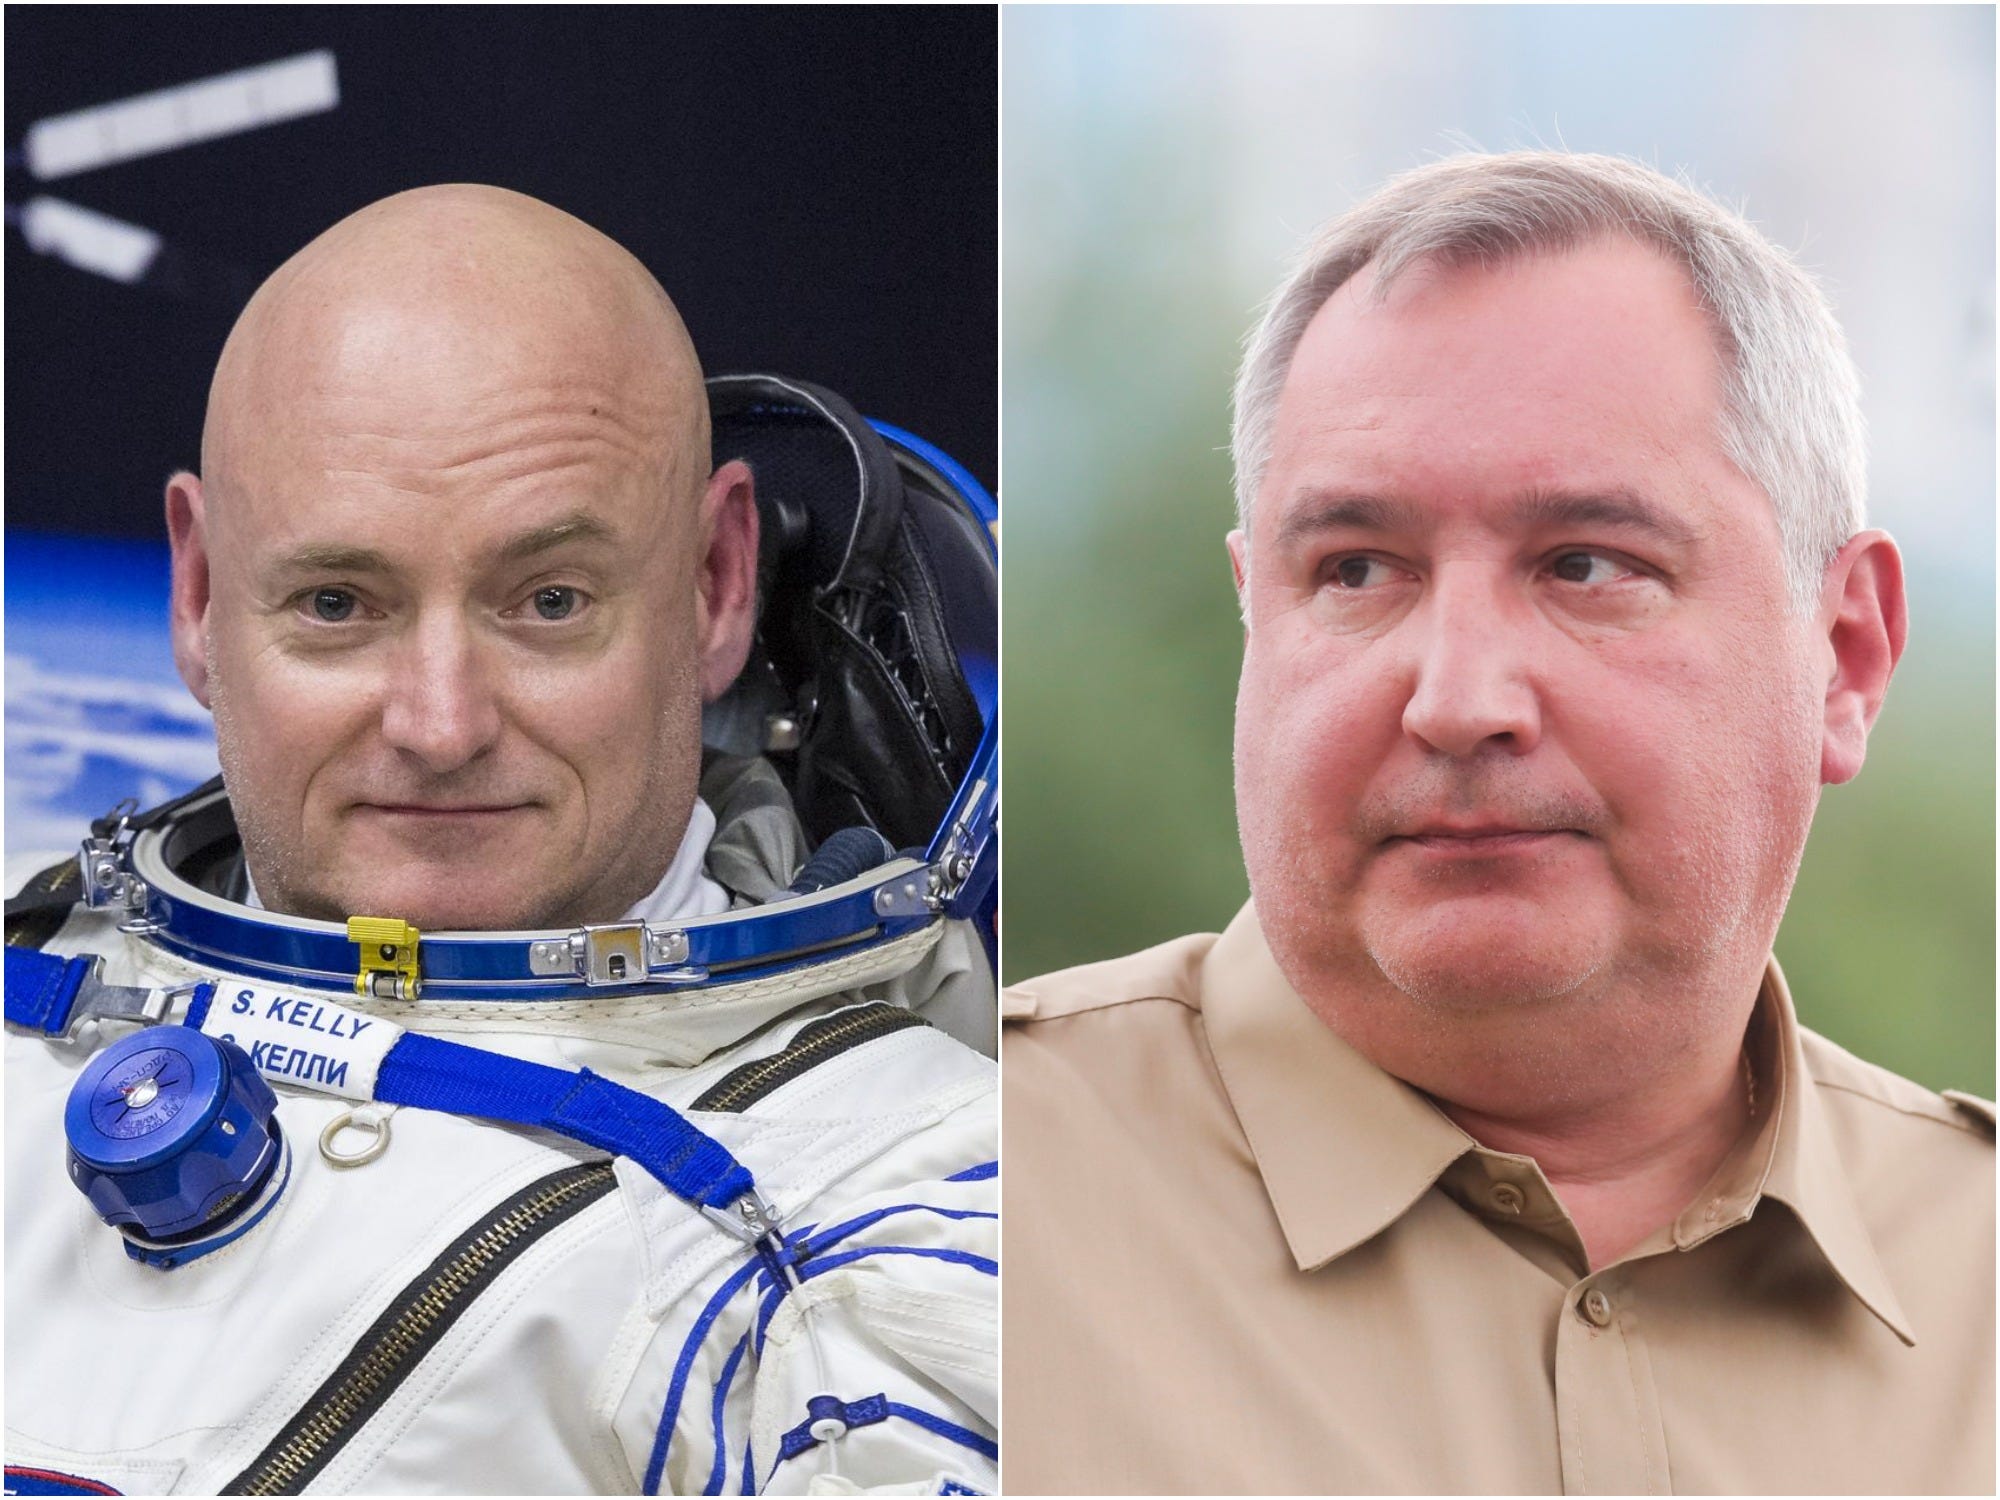 nasa astronaut scott kelly and russian space official dmitry rogozin portraits side by side